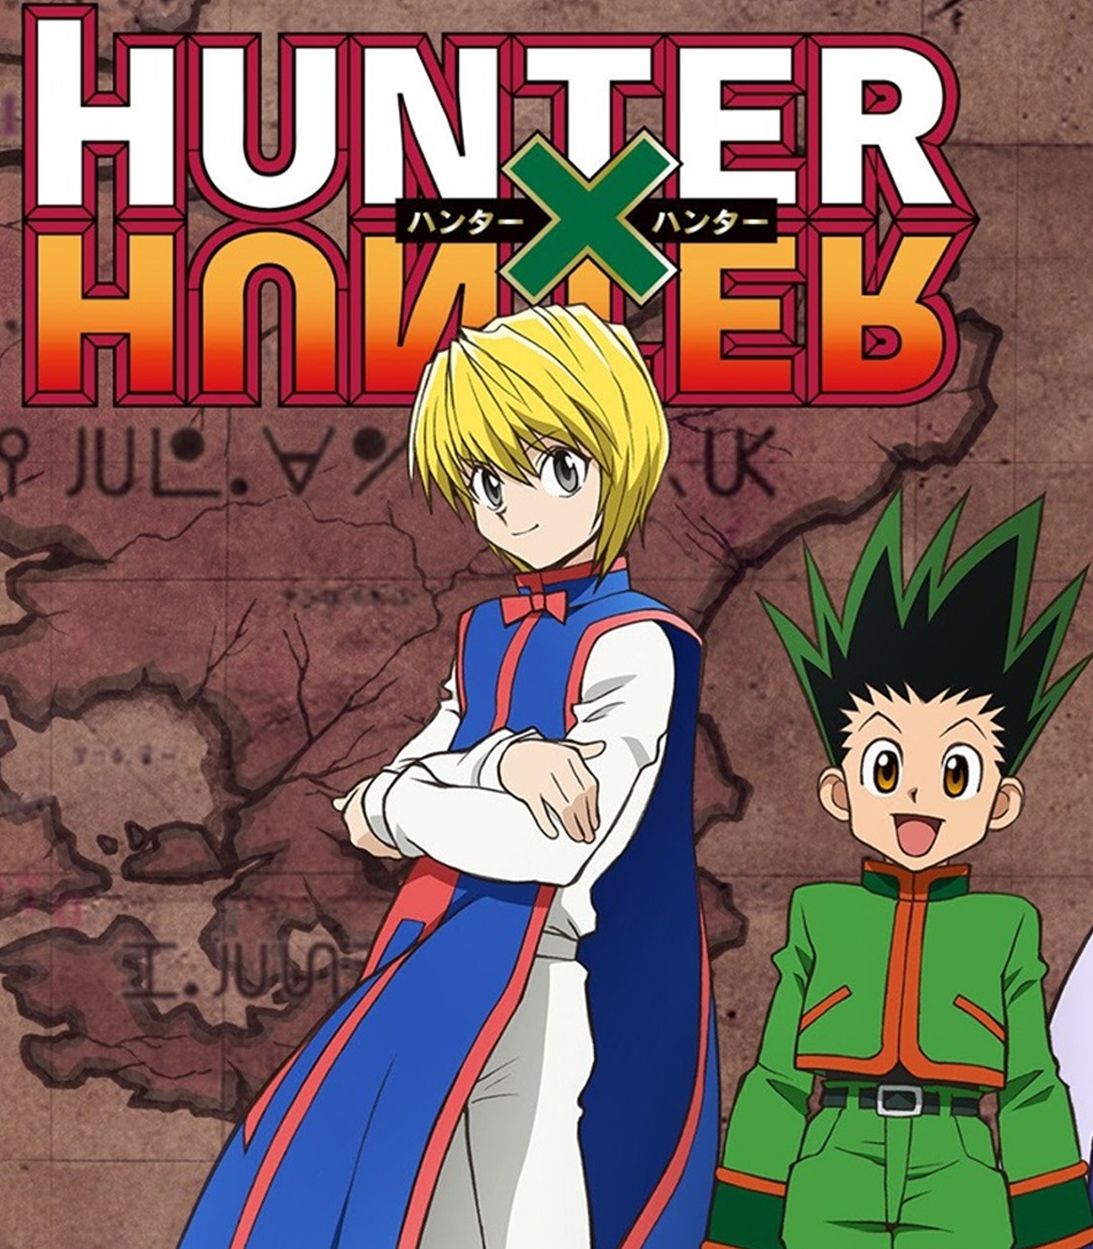 Gon and Kurapika stand side by side in The Season 1 poster for Hunter x Hunter.